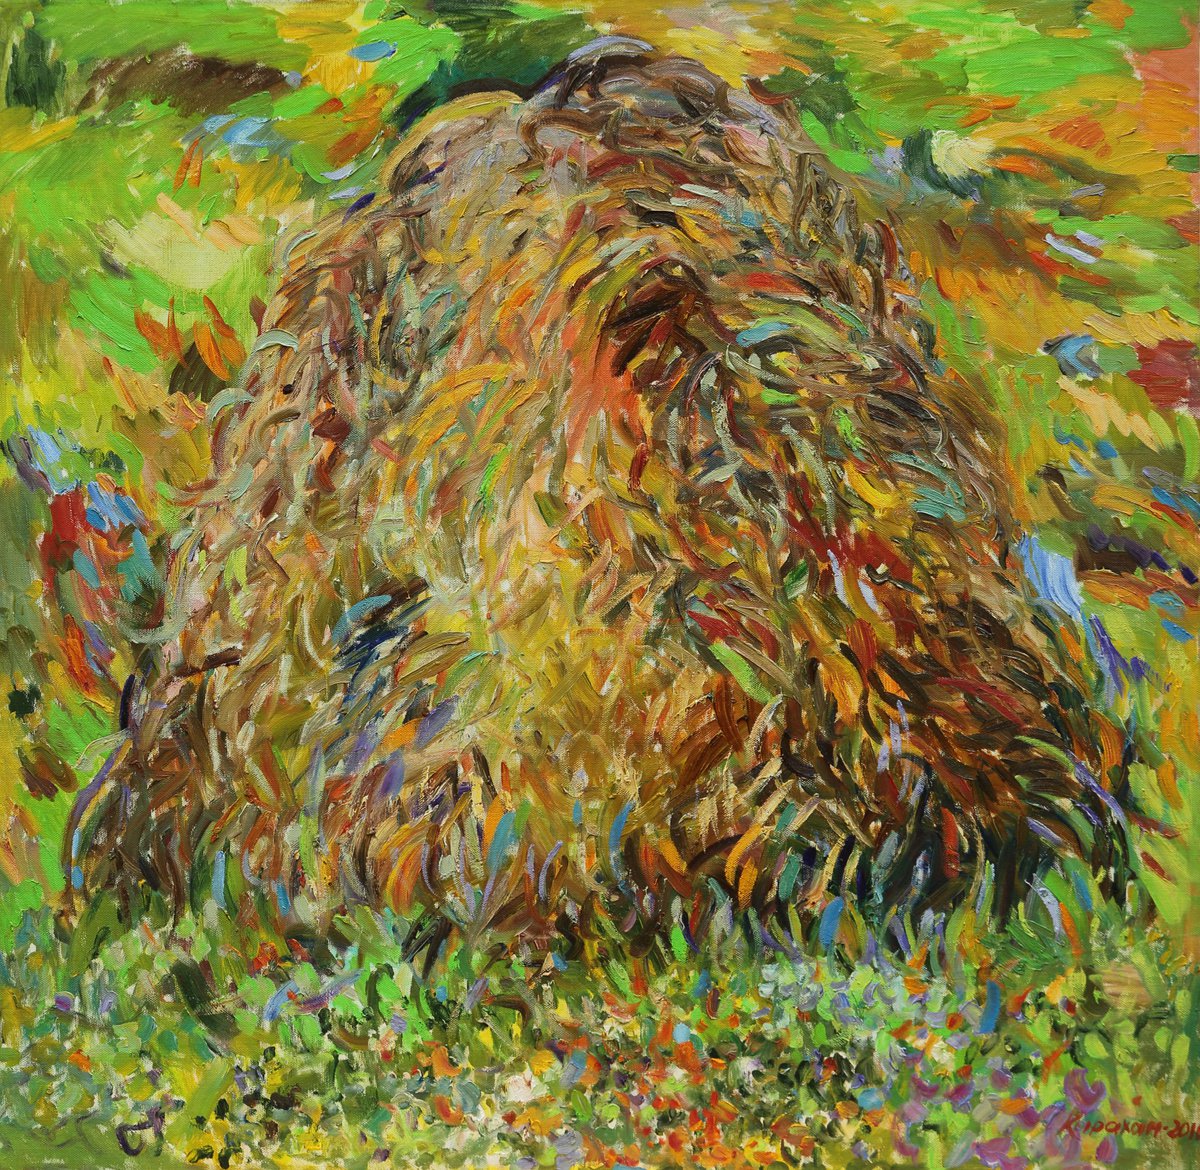 HAYSTACK. EARLY MORNING - XL large landscape art, original oil painting, village countrys... by Karakhan